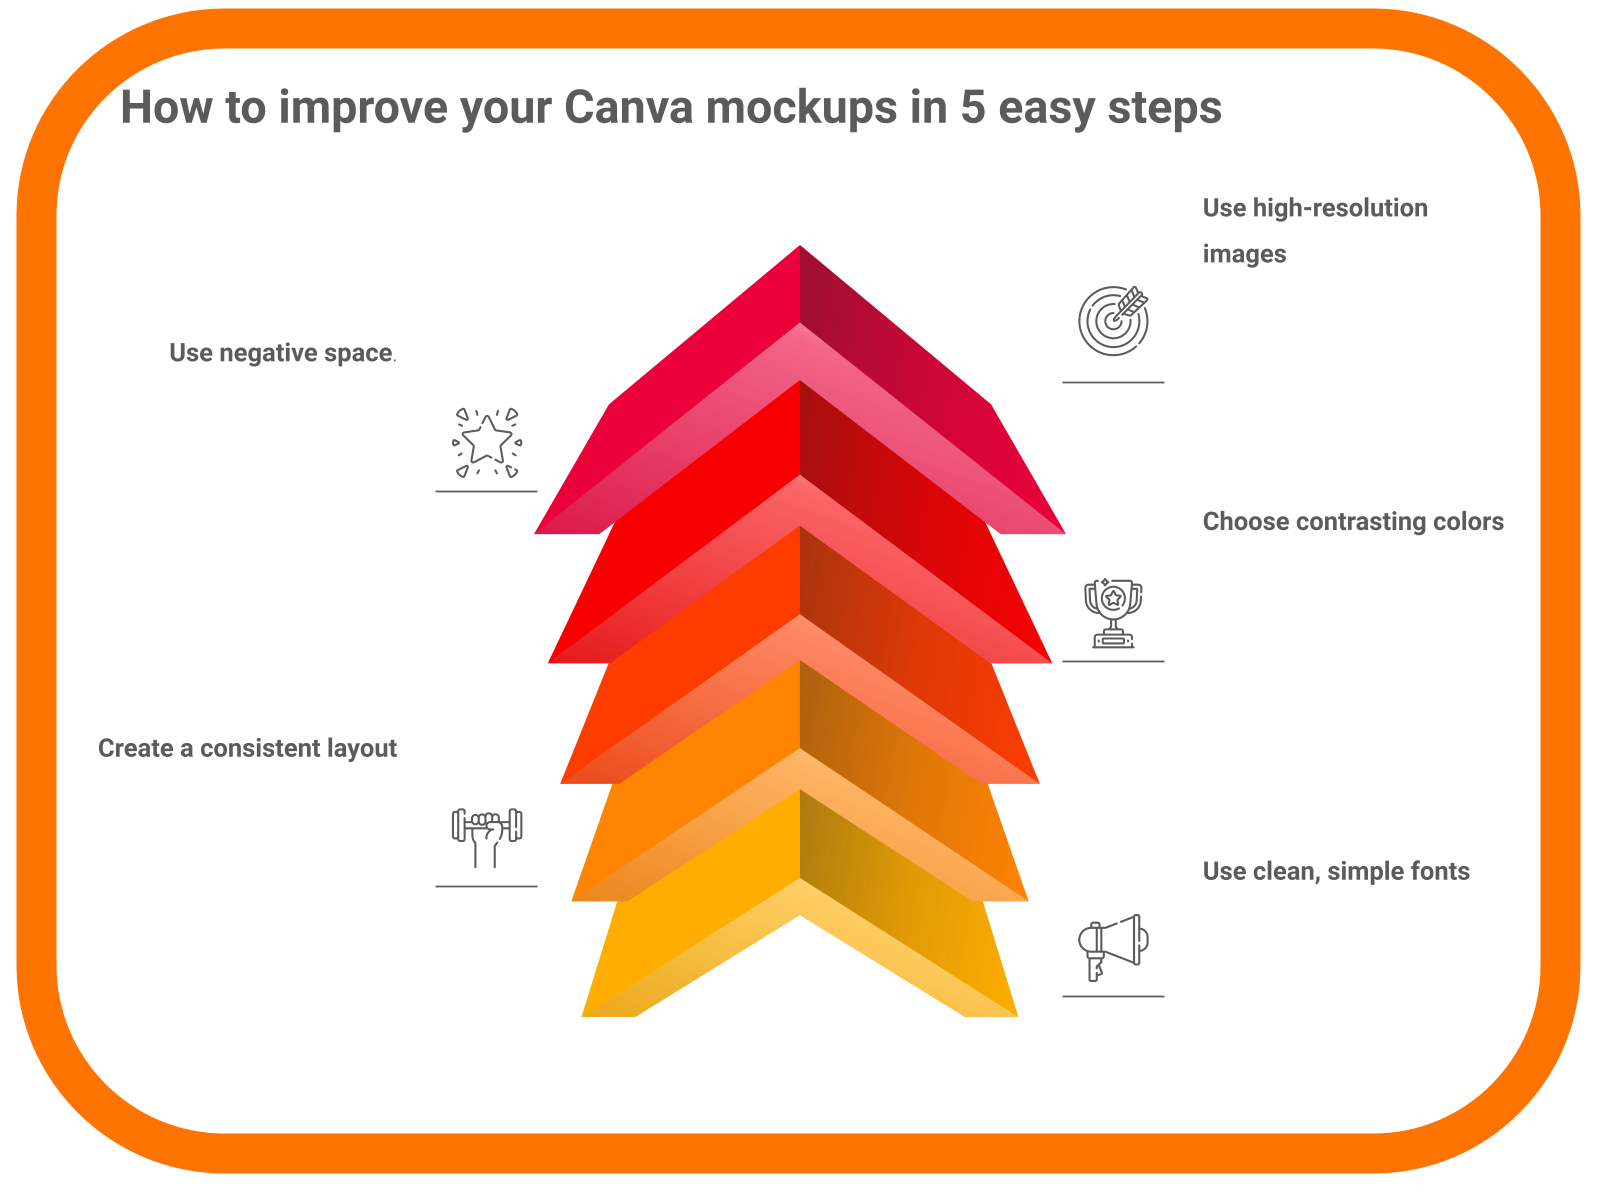 How to improve your Canva mockups in 5 easy steps